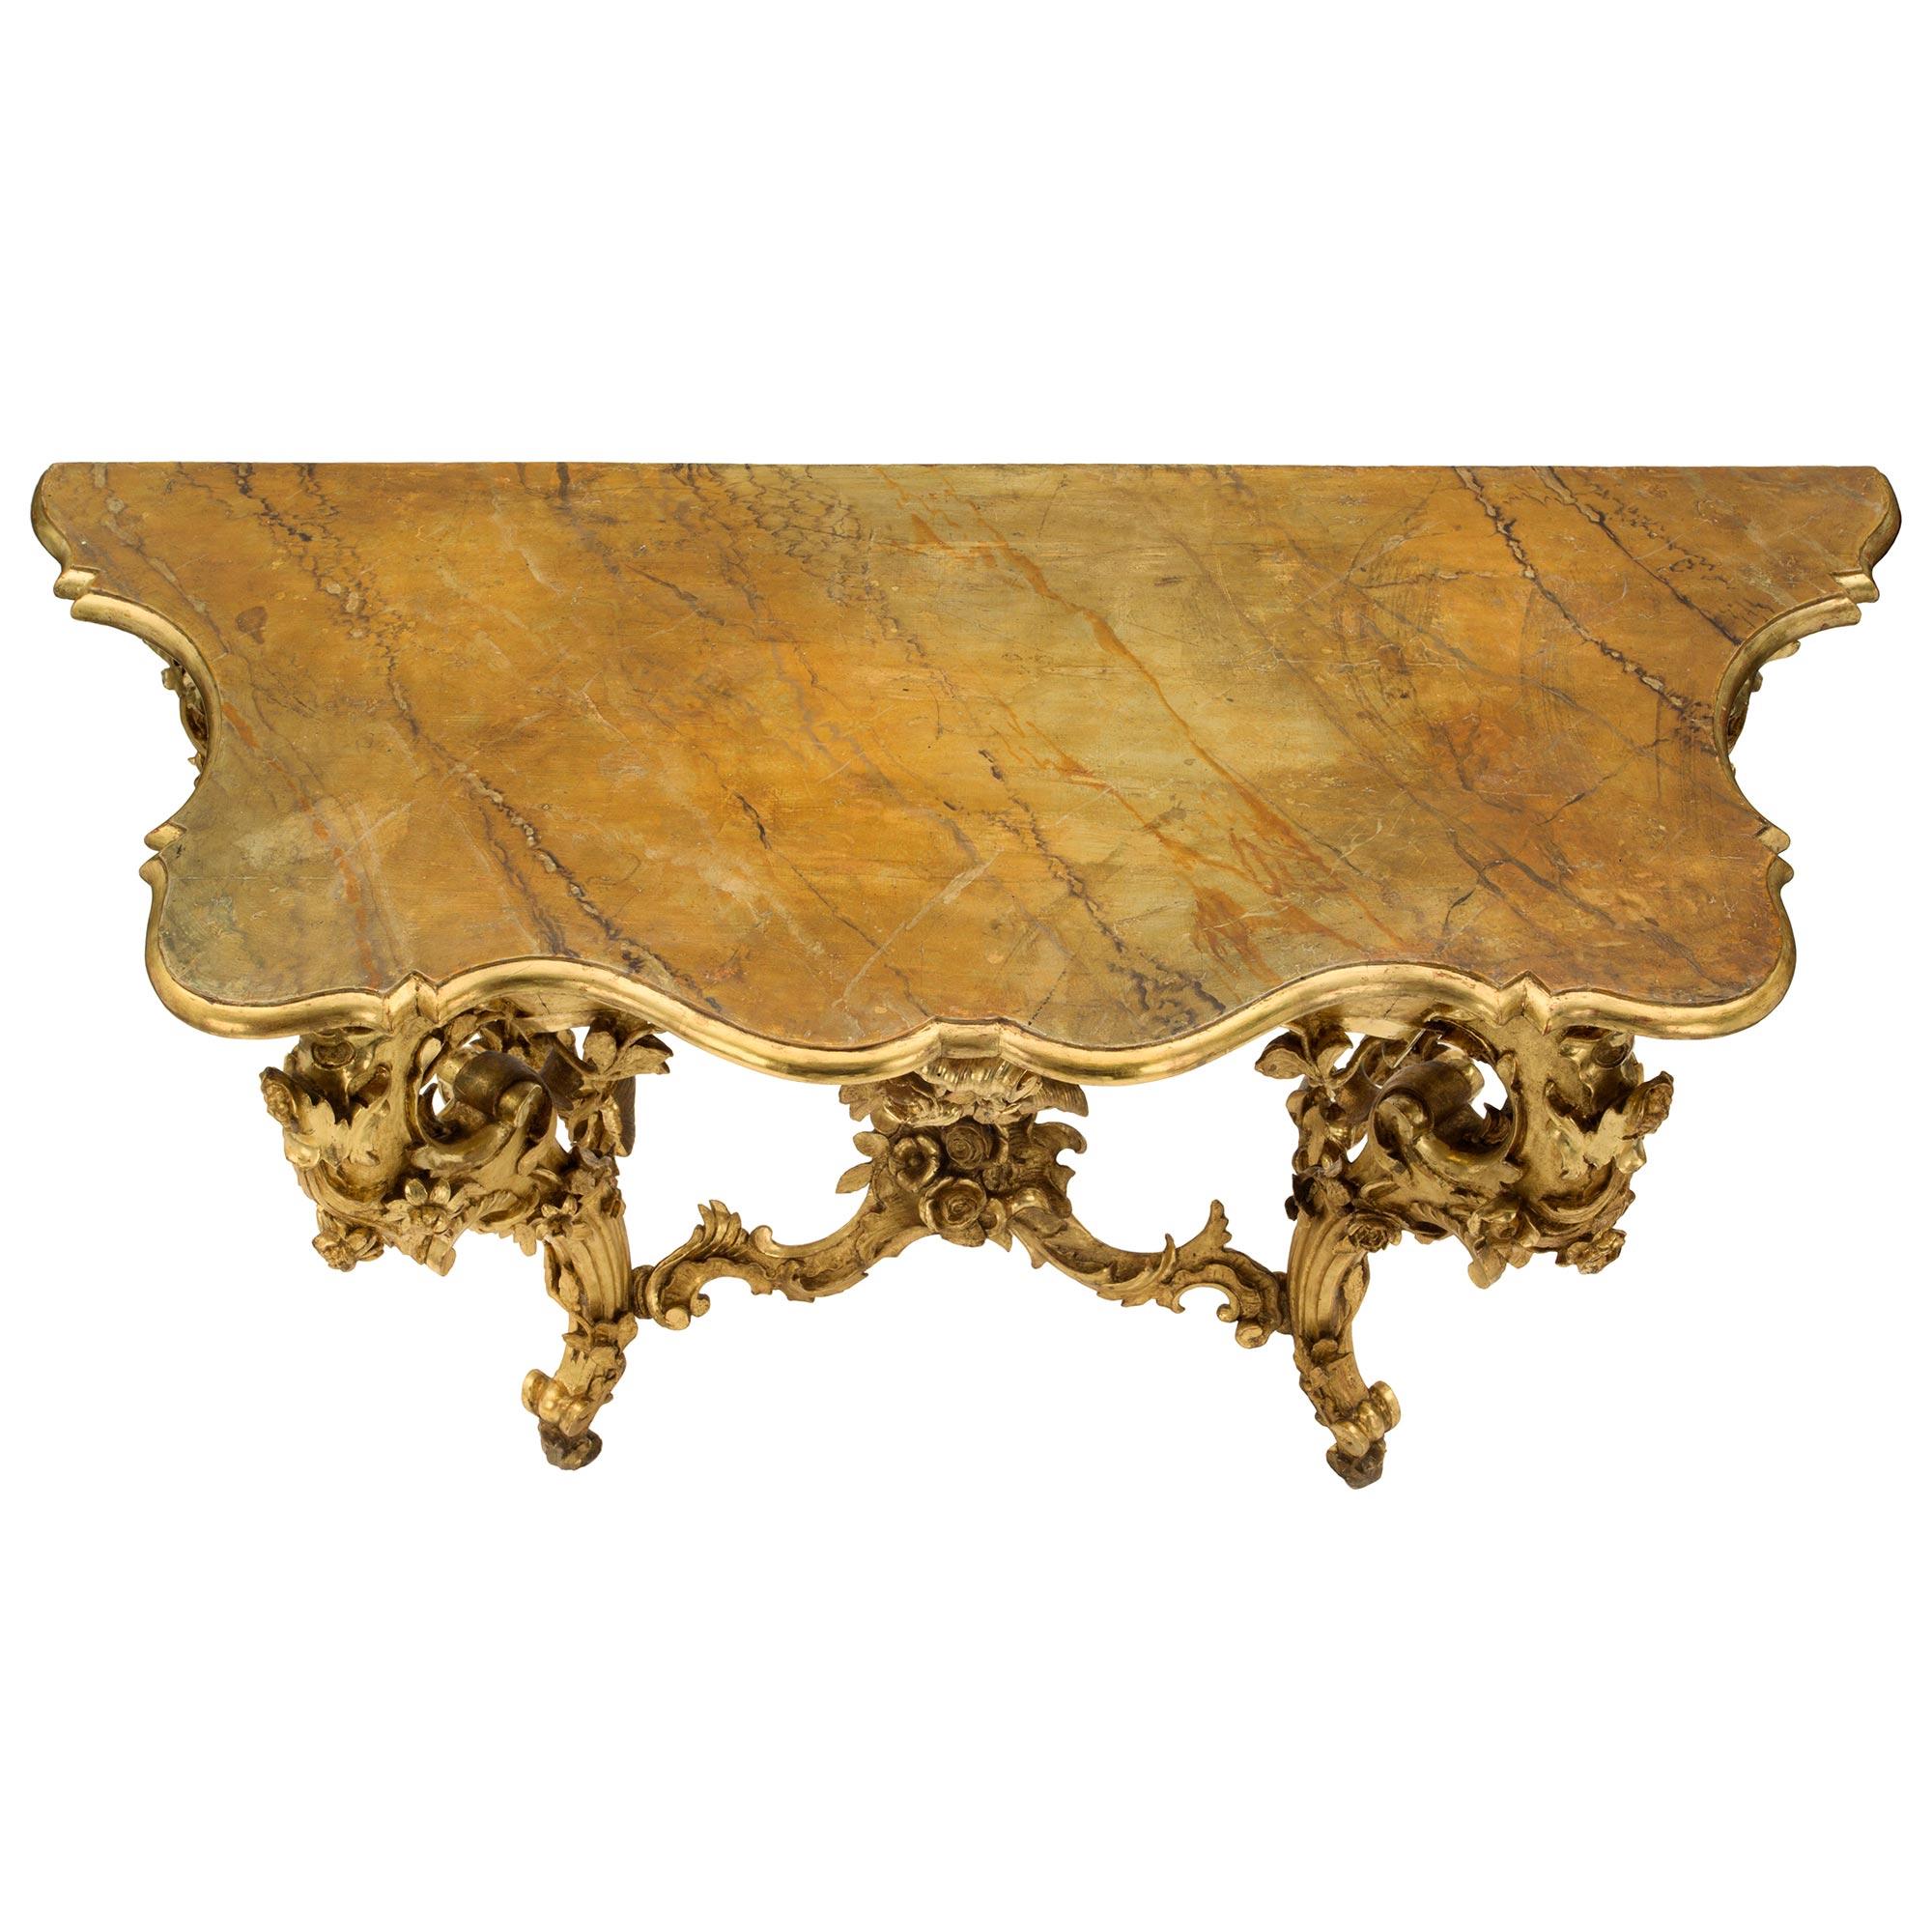 A stunning Italian 19th century Louis XV st. finely carved giltwood freestanding console. The impressive console is raised by S scrolled legs with exquisite elaborate foliate carvings of wrap around flowers and branches. Each leg is connected by the